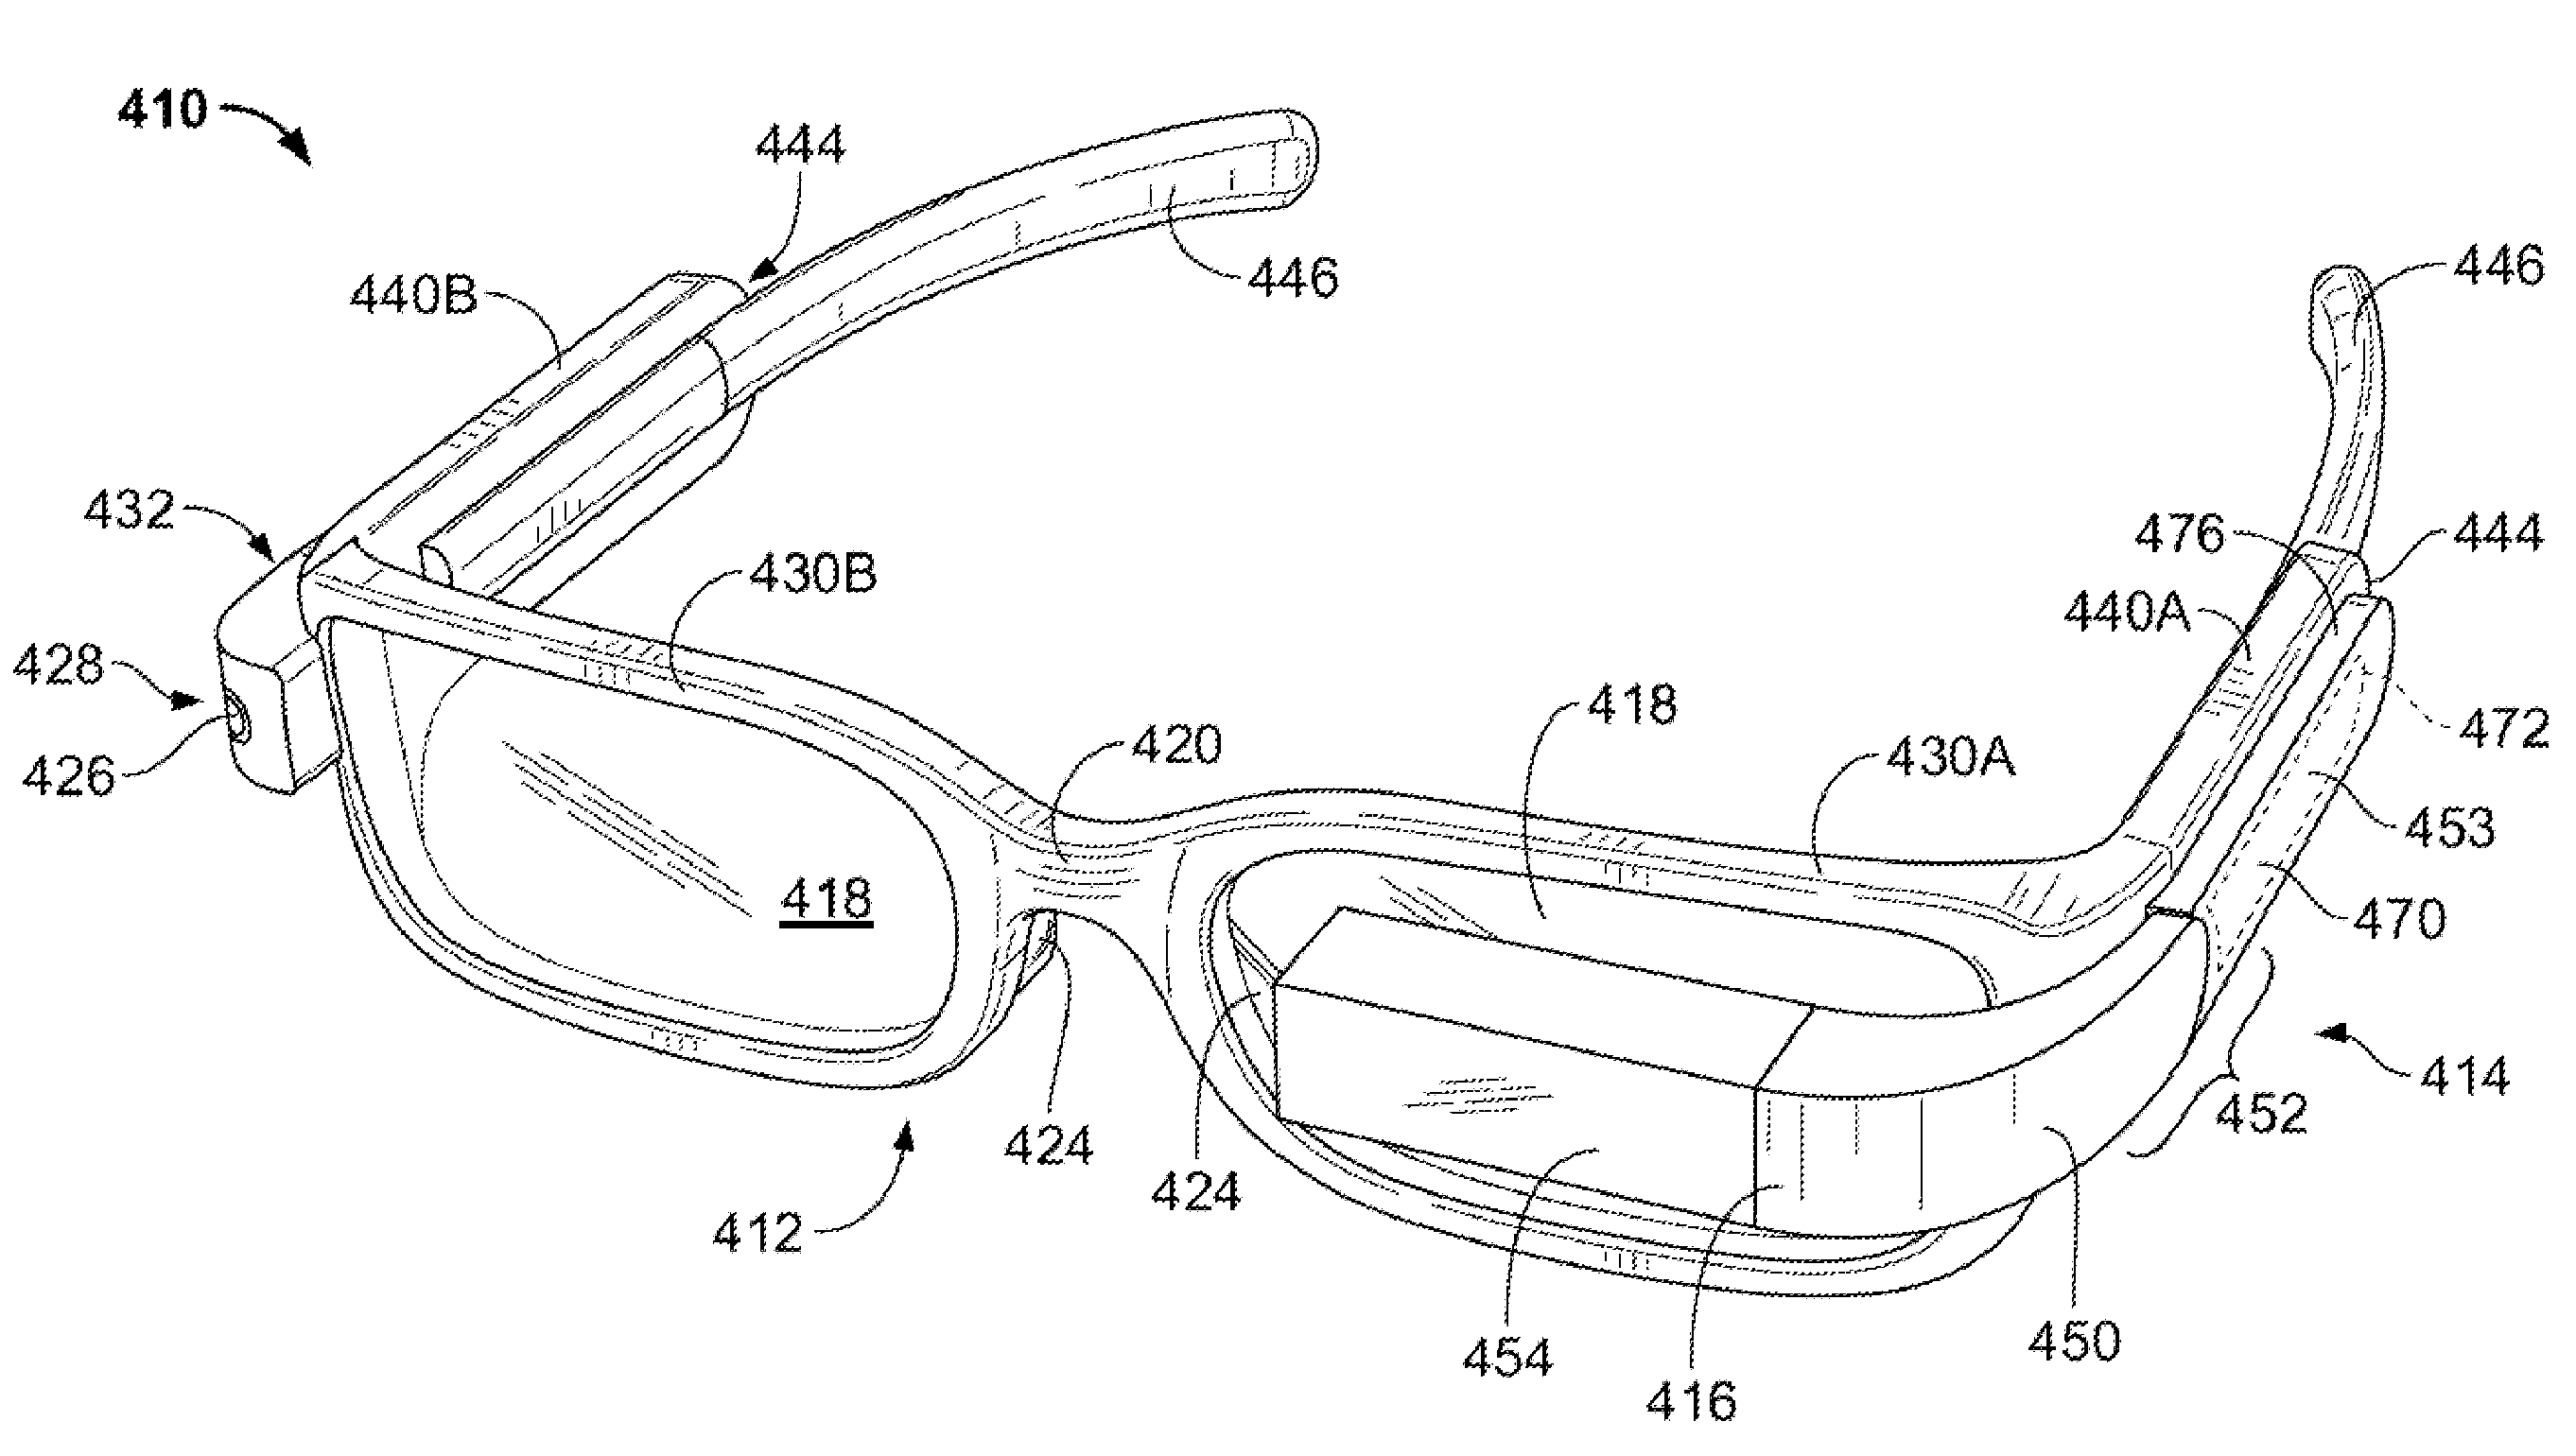 Eyeglass frame with input and output functionality